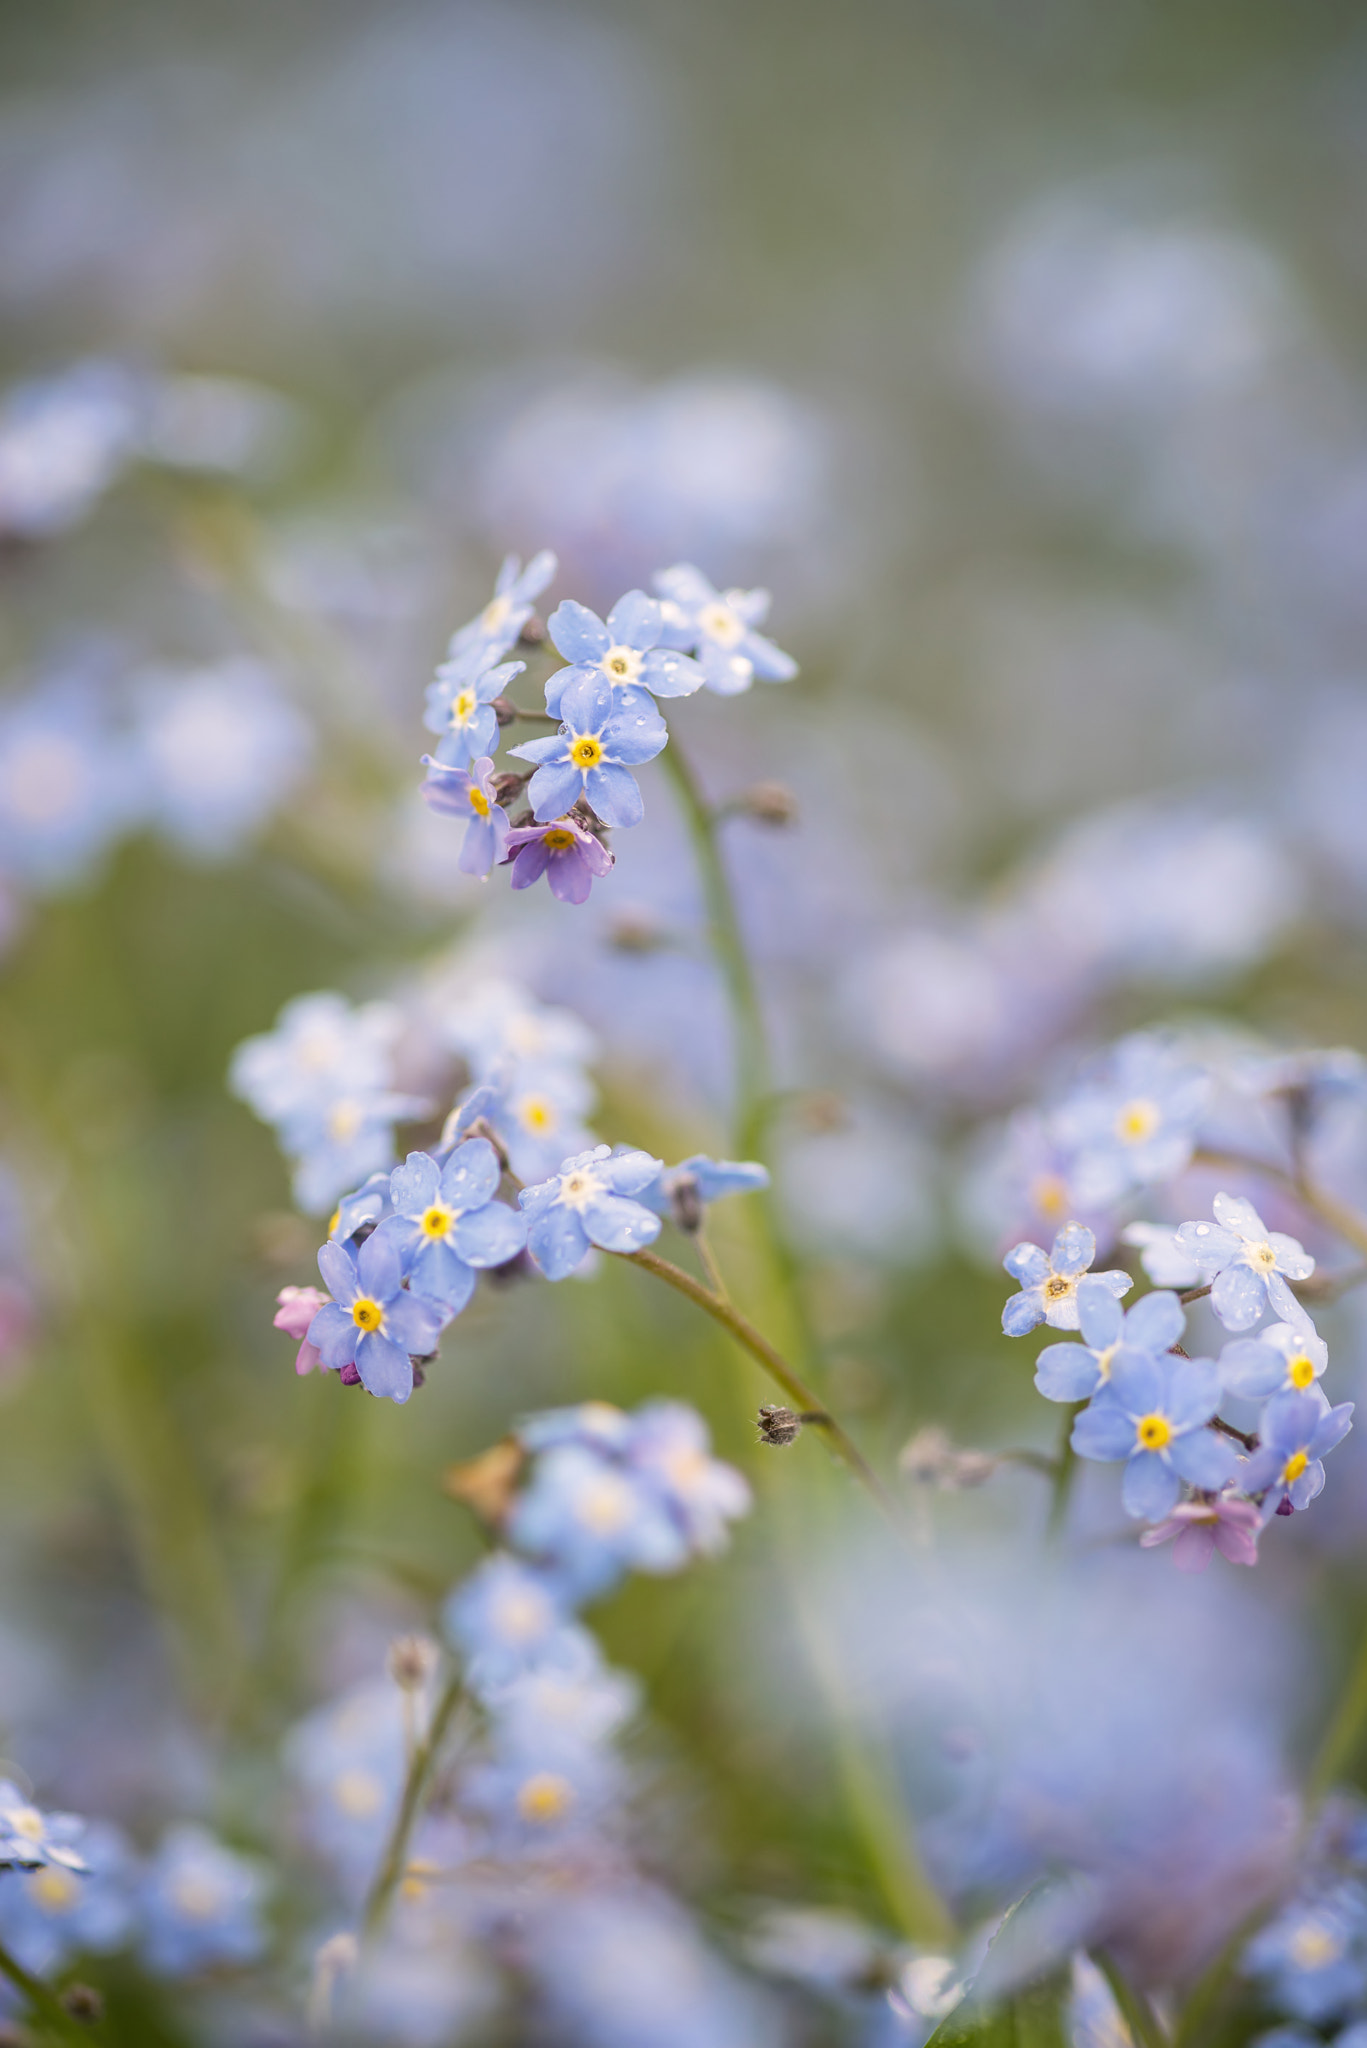 Nikon D600 + Sigma 105mm F2.8 EX DG Macro sample photo. Vibrant forget-me-not spring flowers with shallow depth of field photography